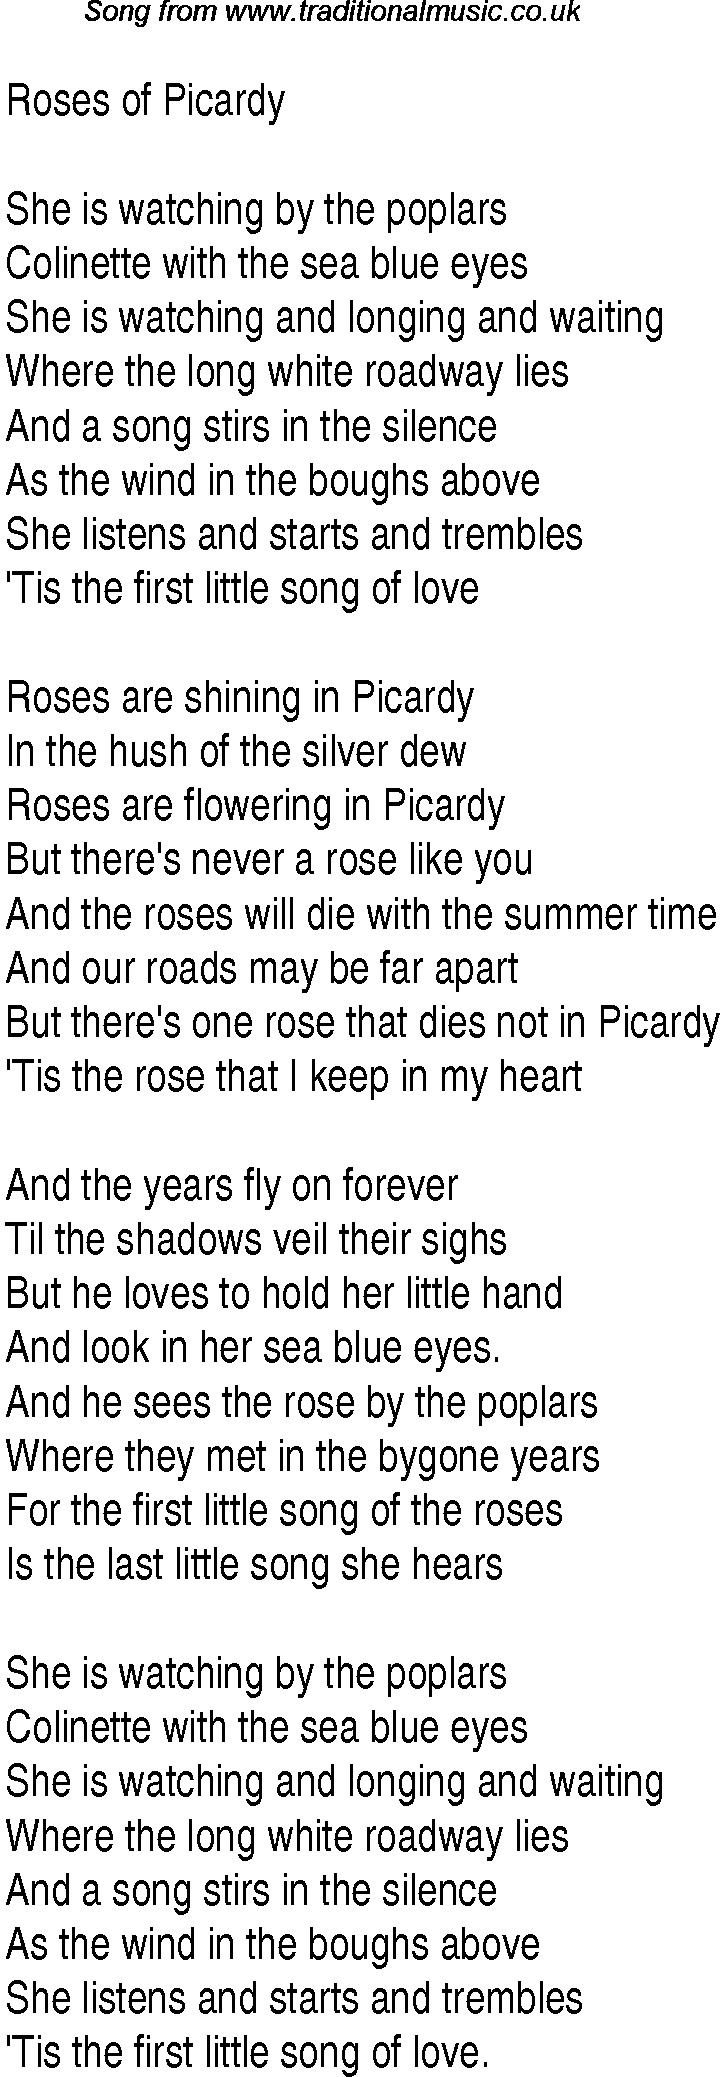 1940s top songs - lyrics for Roses Of Picardy